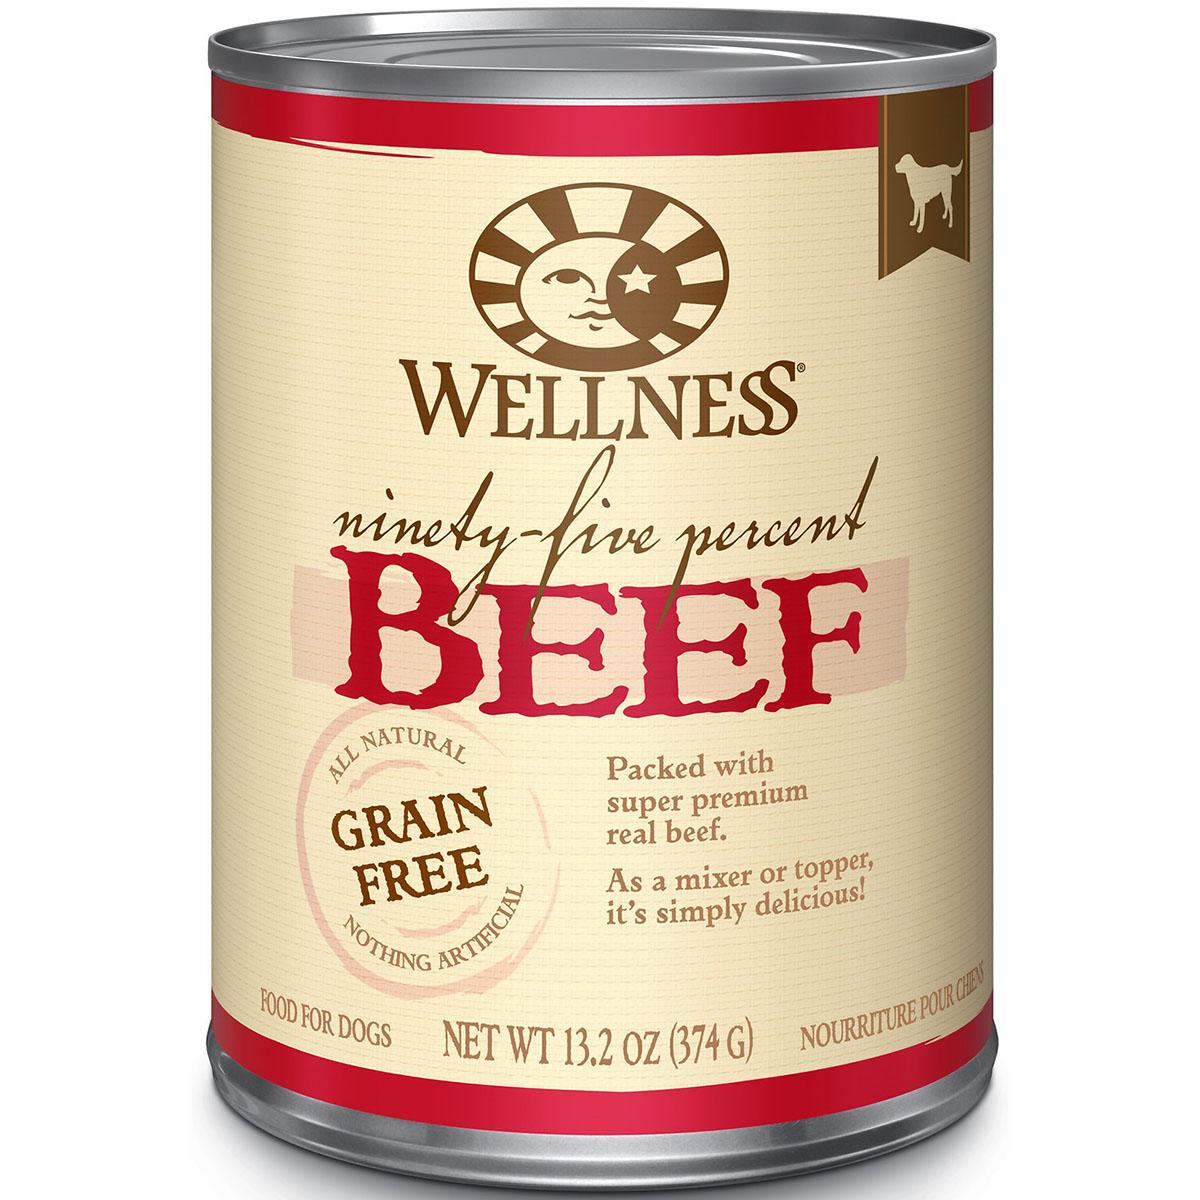 Wellness Ninety-Five Percent Beef Grain-Free Dog Food Mixer and Topper